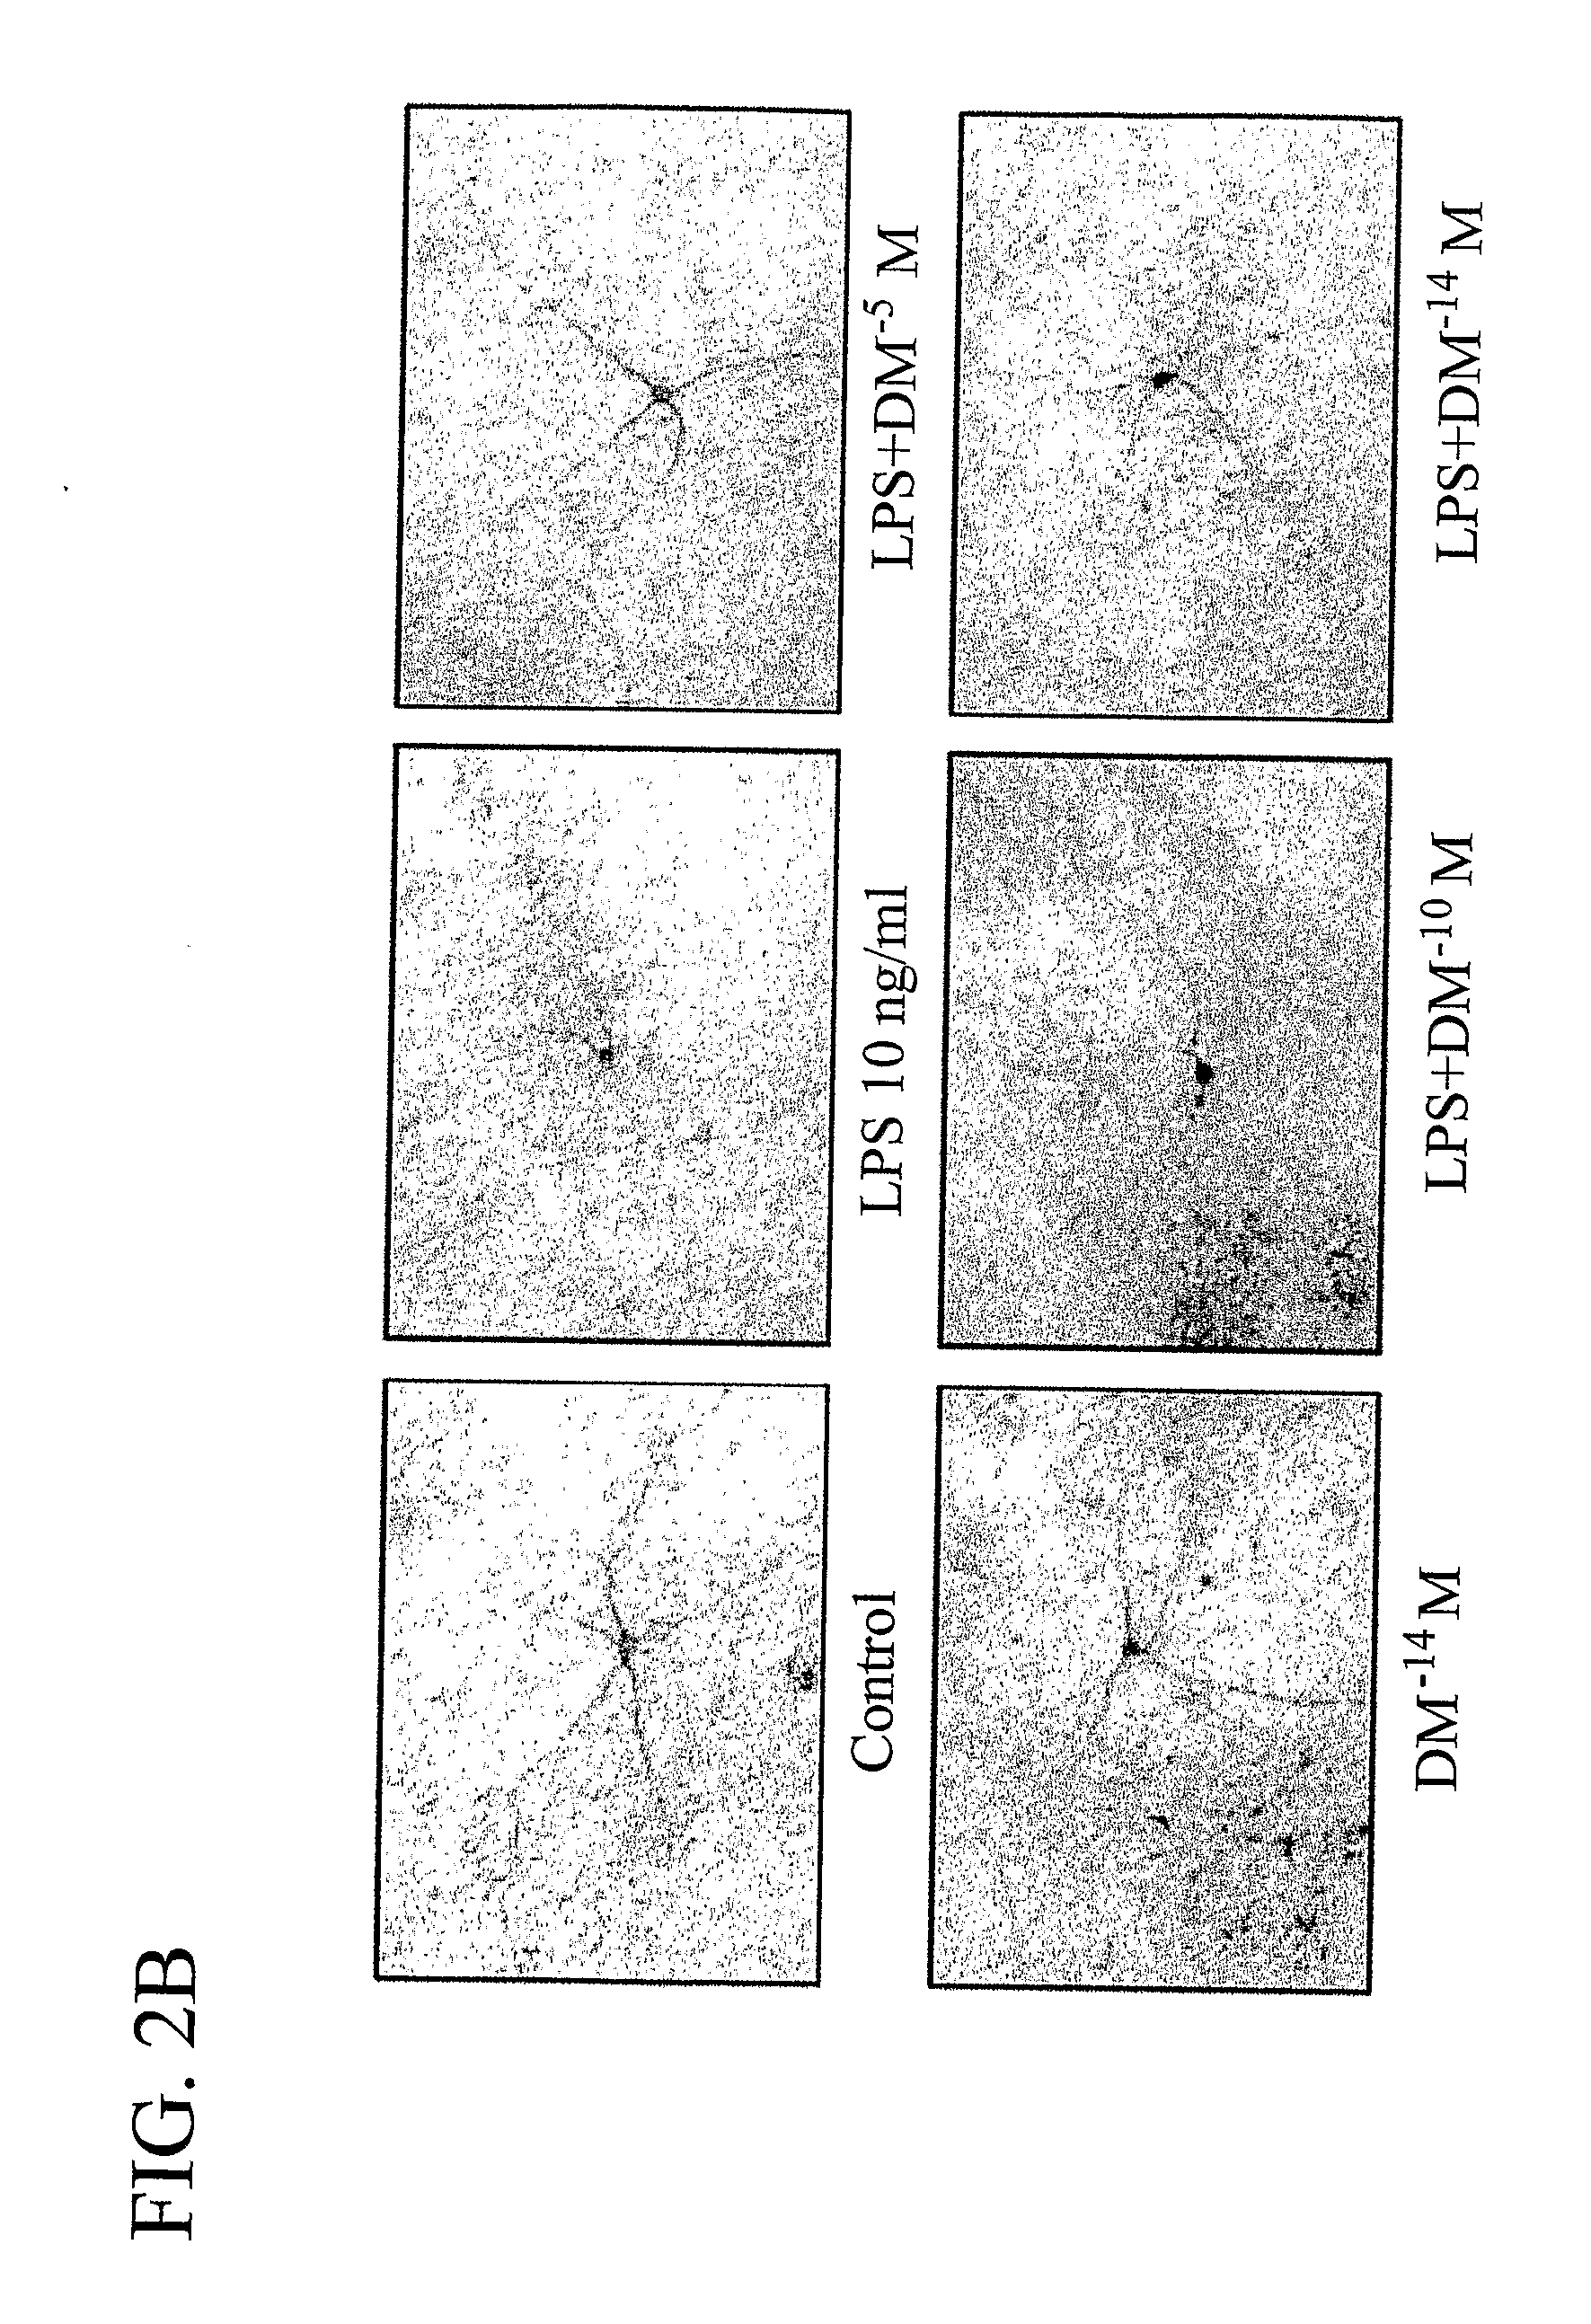 Methods Related to the Treatment of Neurodegenerative and Inflammatory Conditions